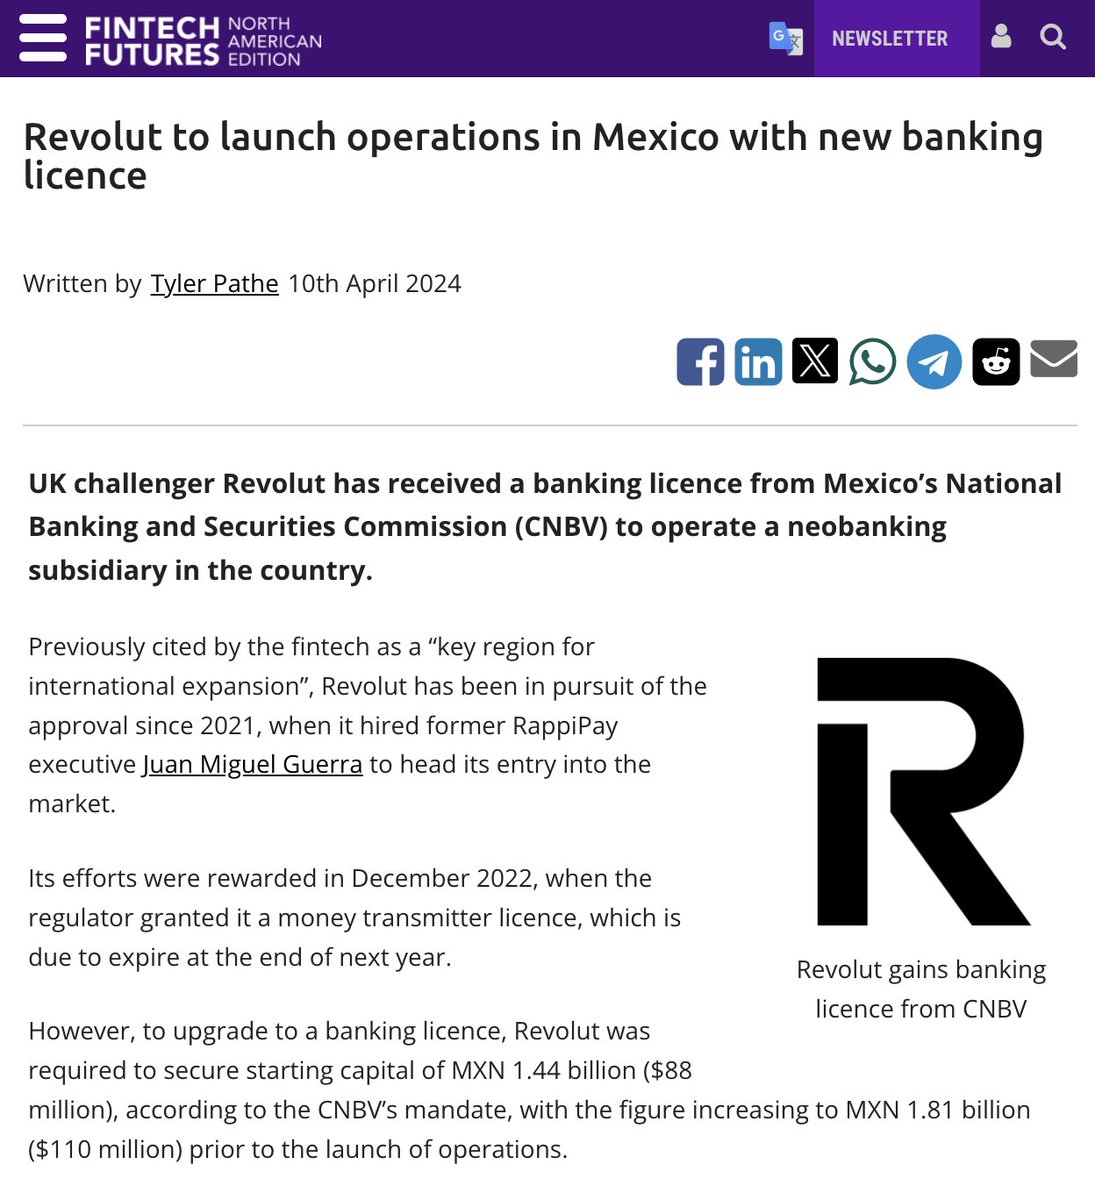 Revolut got a banking license in Mexico! They hired a local CEO ~3 years ago and just got approved (fintech takes time), and they had to secure $110 million in starting capital. They are expected to launch with money transfer services